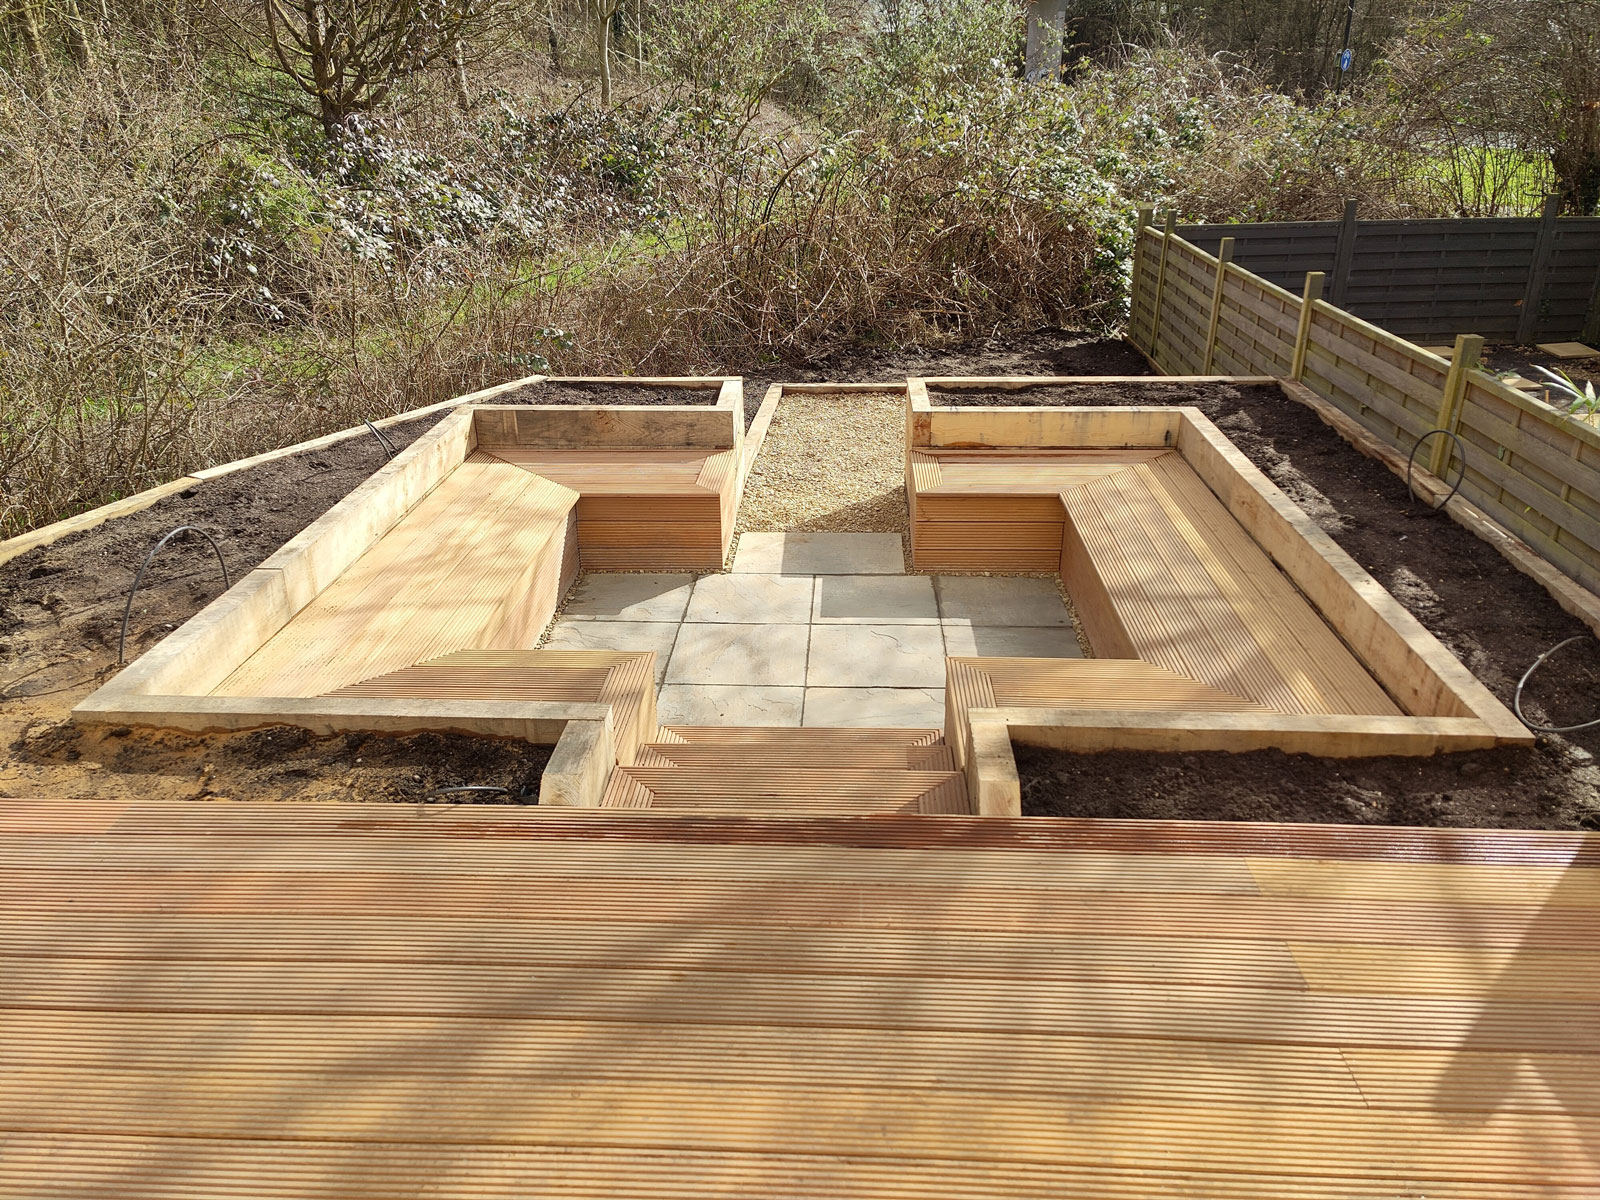 view from a large deck looking over a sunken patio enclosed by planting areas and timber benches